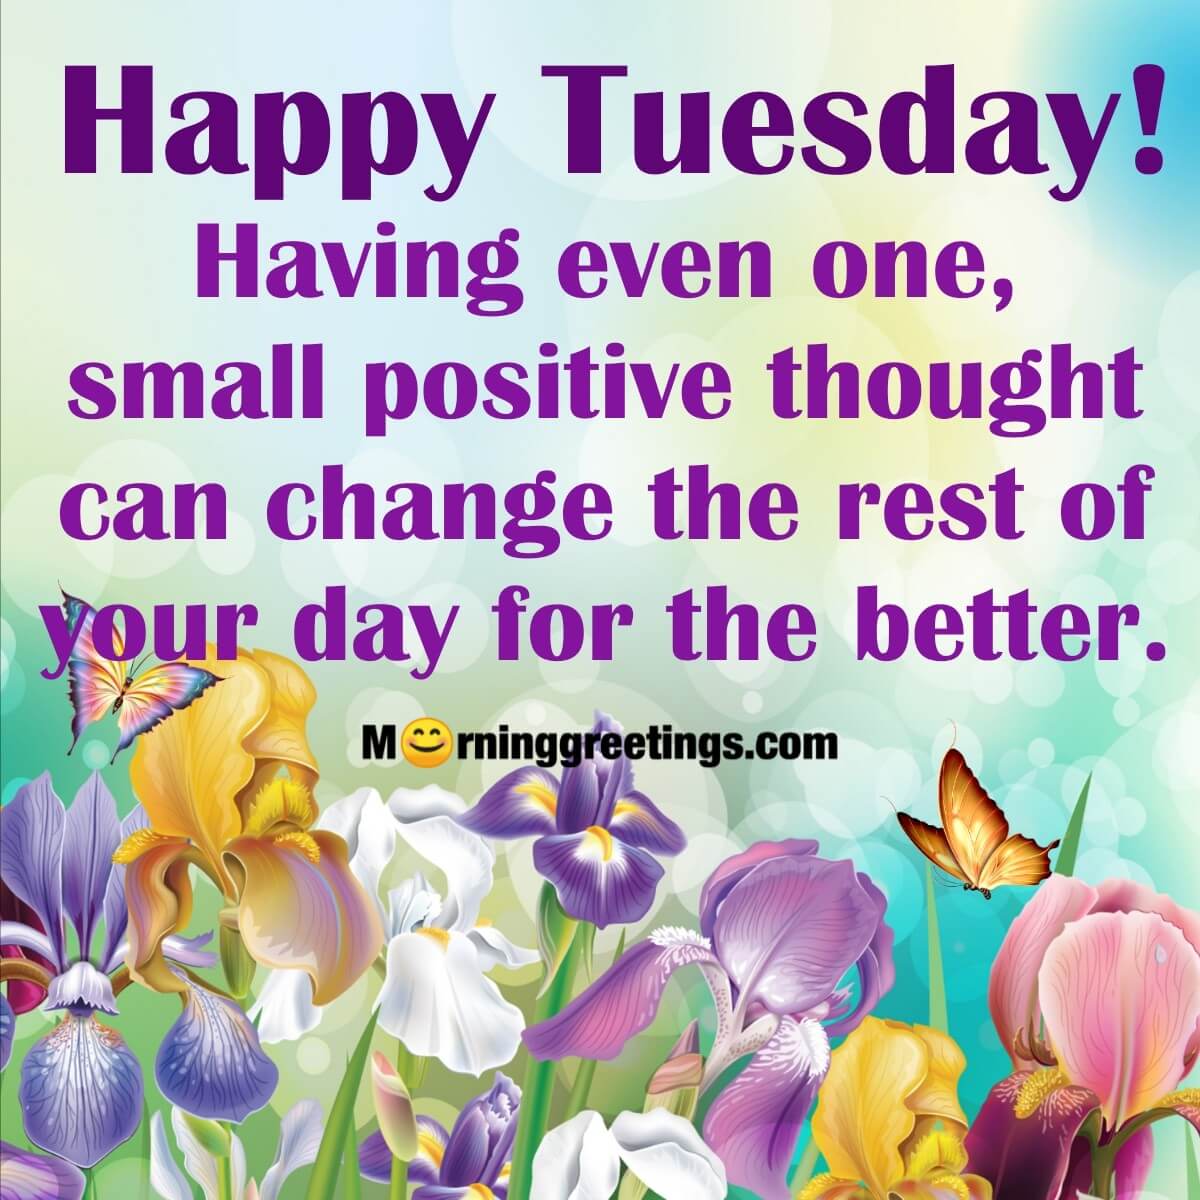 Best Tuesday Morning Quotes Wishes Pics Morning Greetings Morning Quotes And Wishes Images